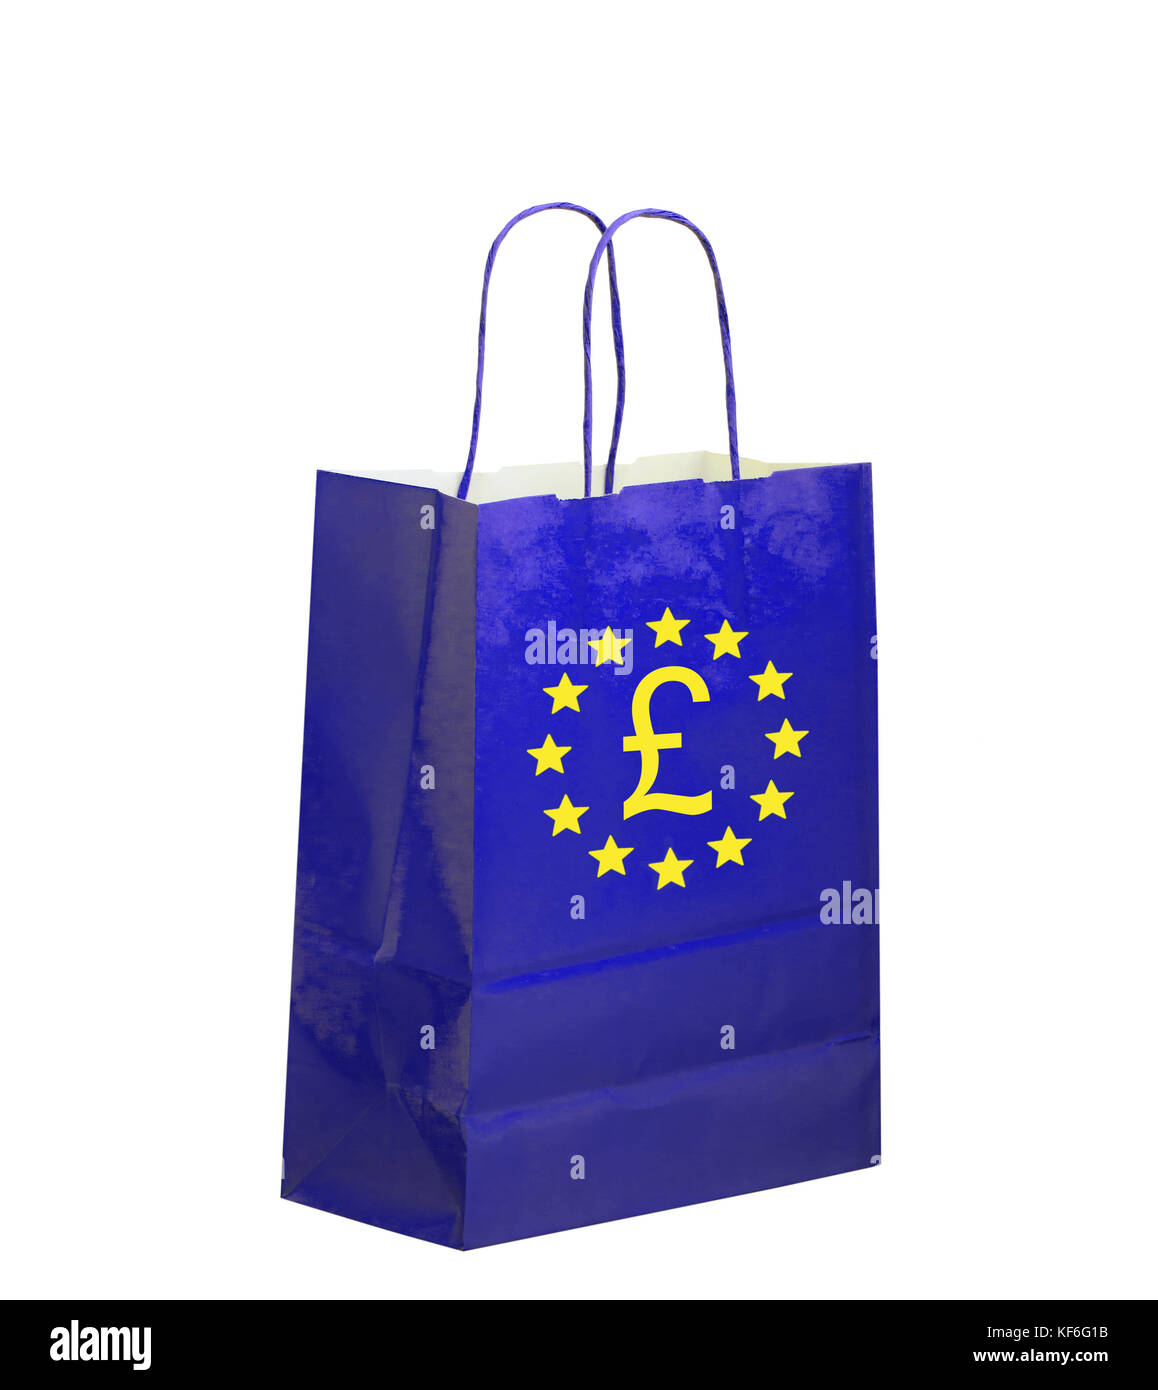 Political concept UK, Brexit. Europe going shopping Stock Photo